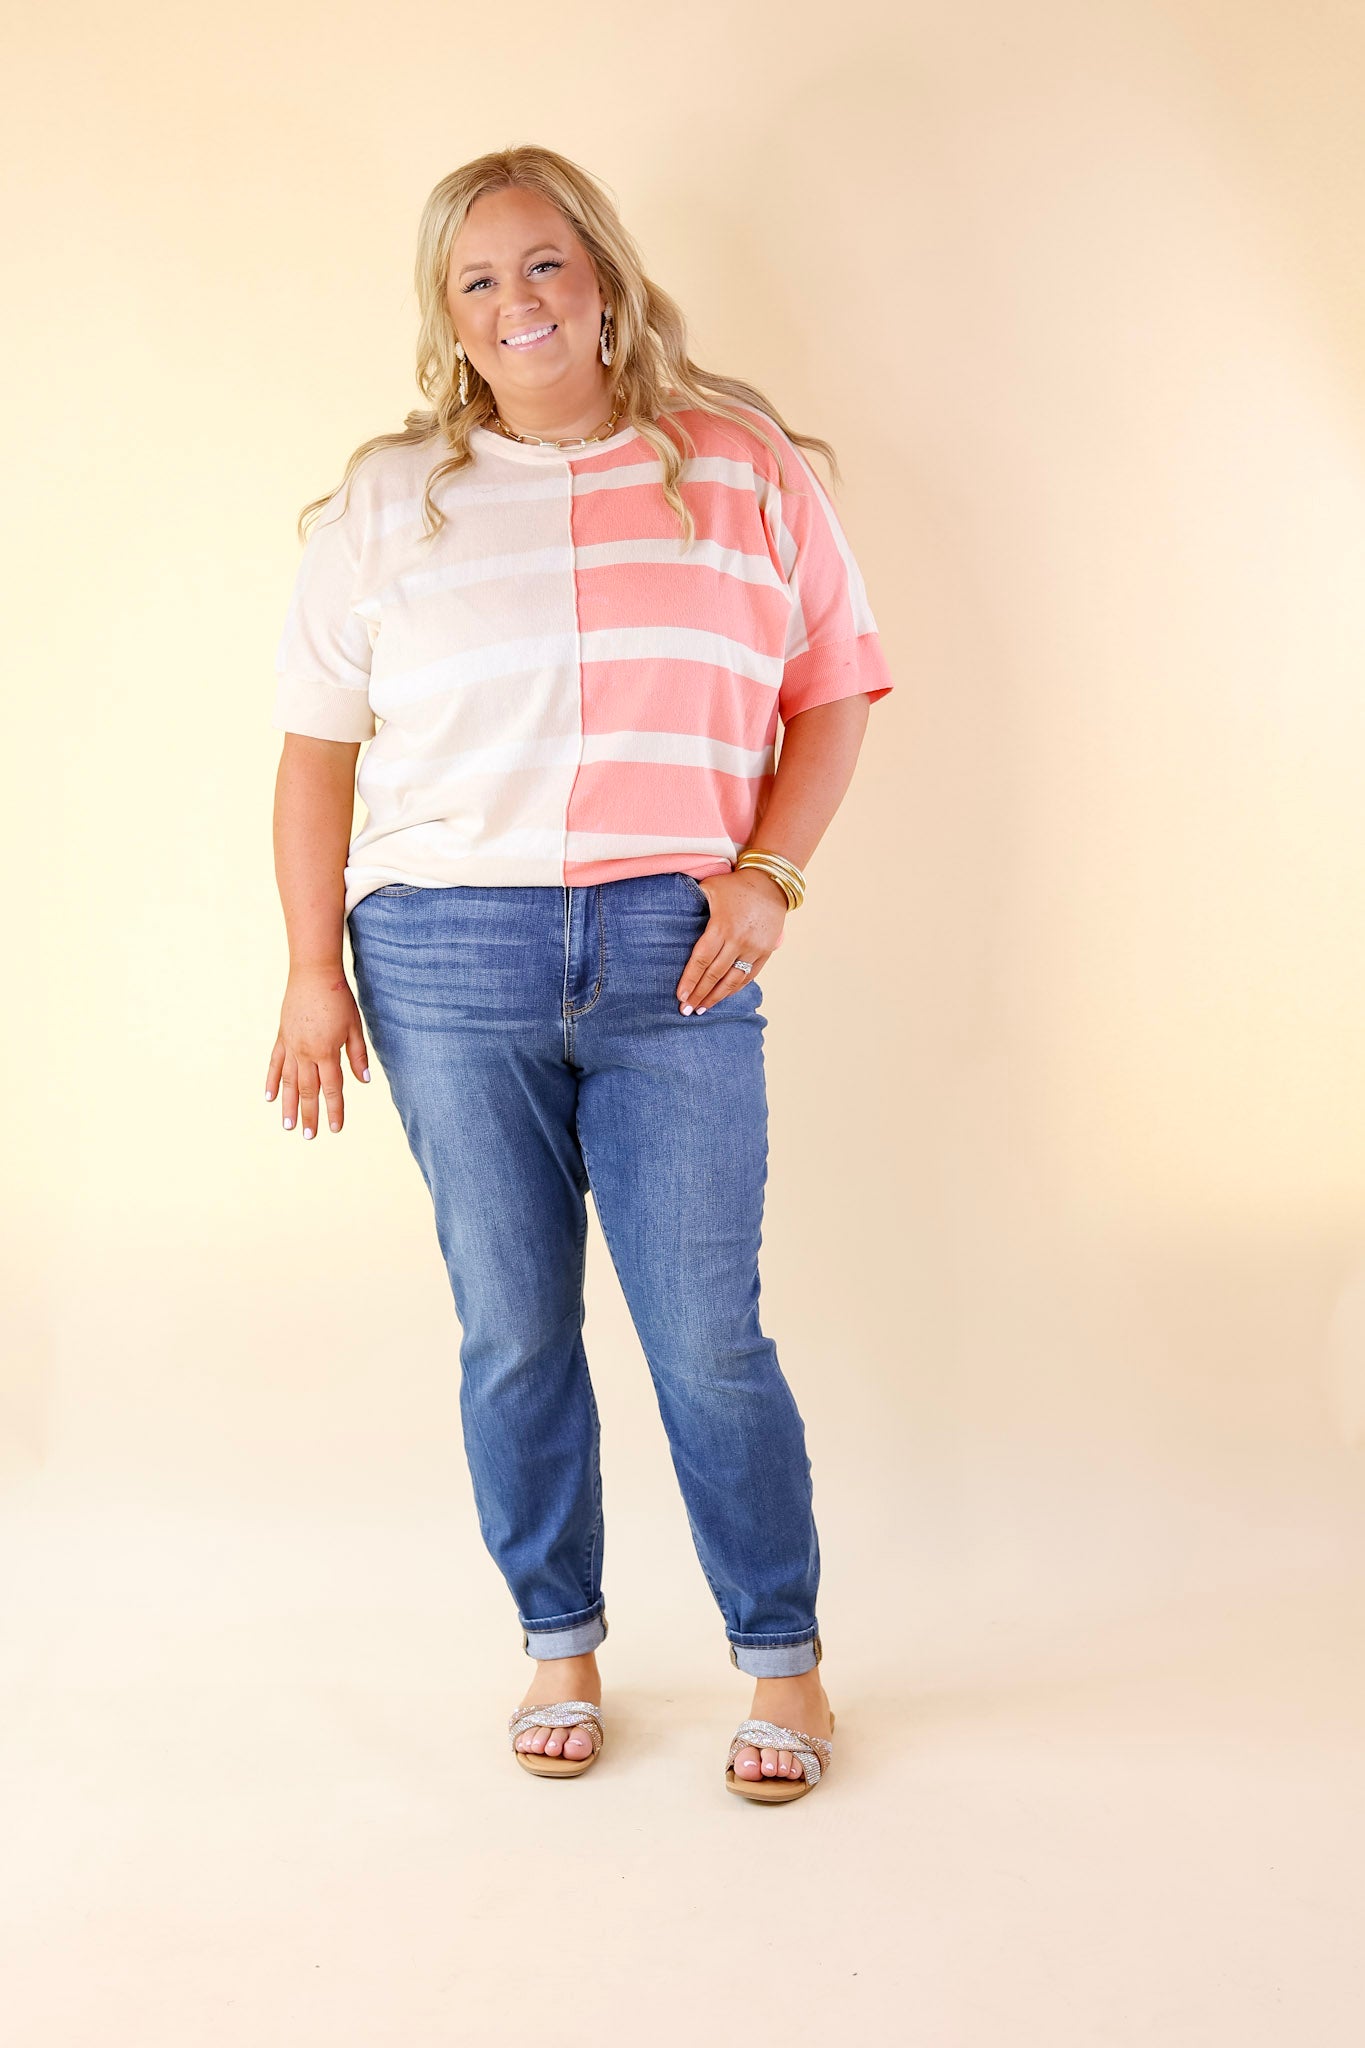 Urban Chic Color Block Striped Knit Top in Cream and Coral - Giddy Up Glamour Boutique